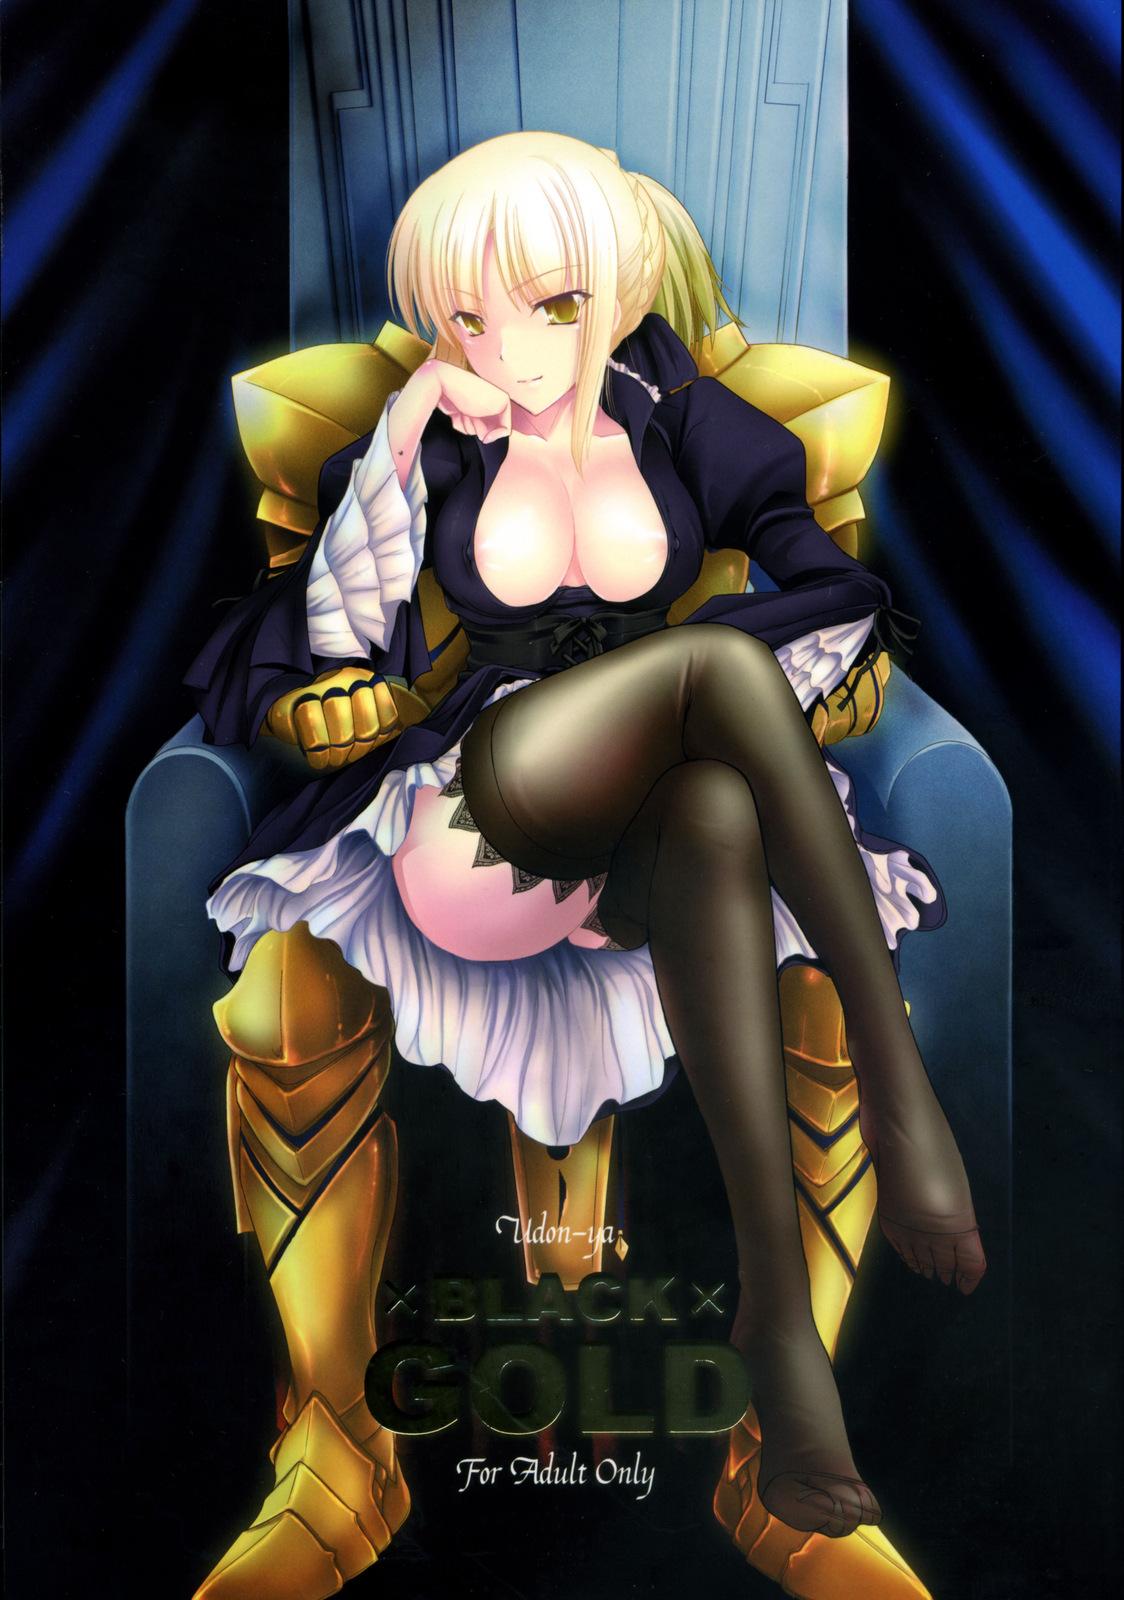 Hidden BLACKxGOLD - Fate stay night Fate hollow ataraxia Foreplay - Picture 1